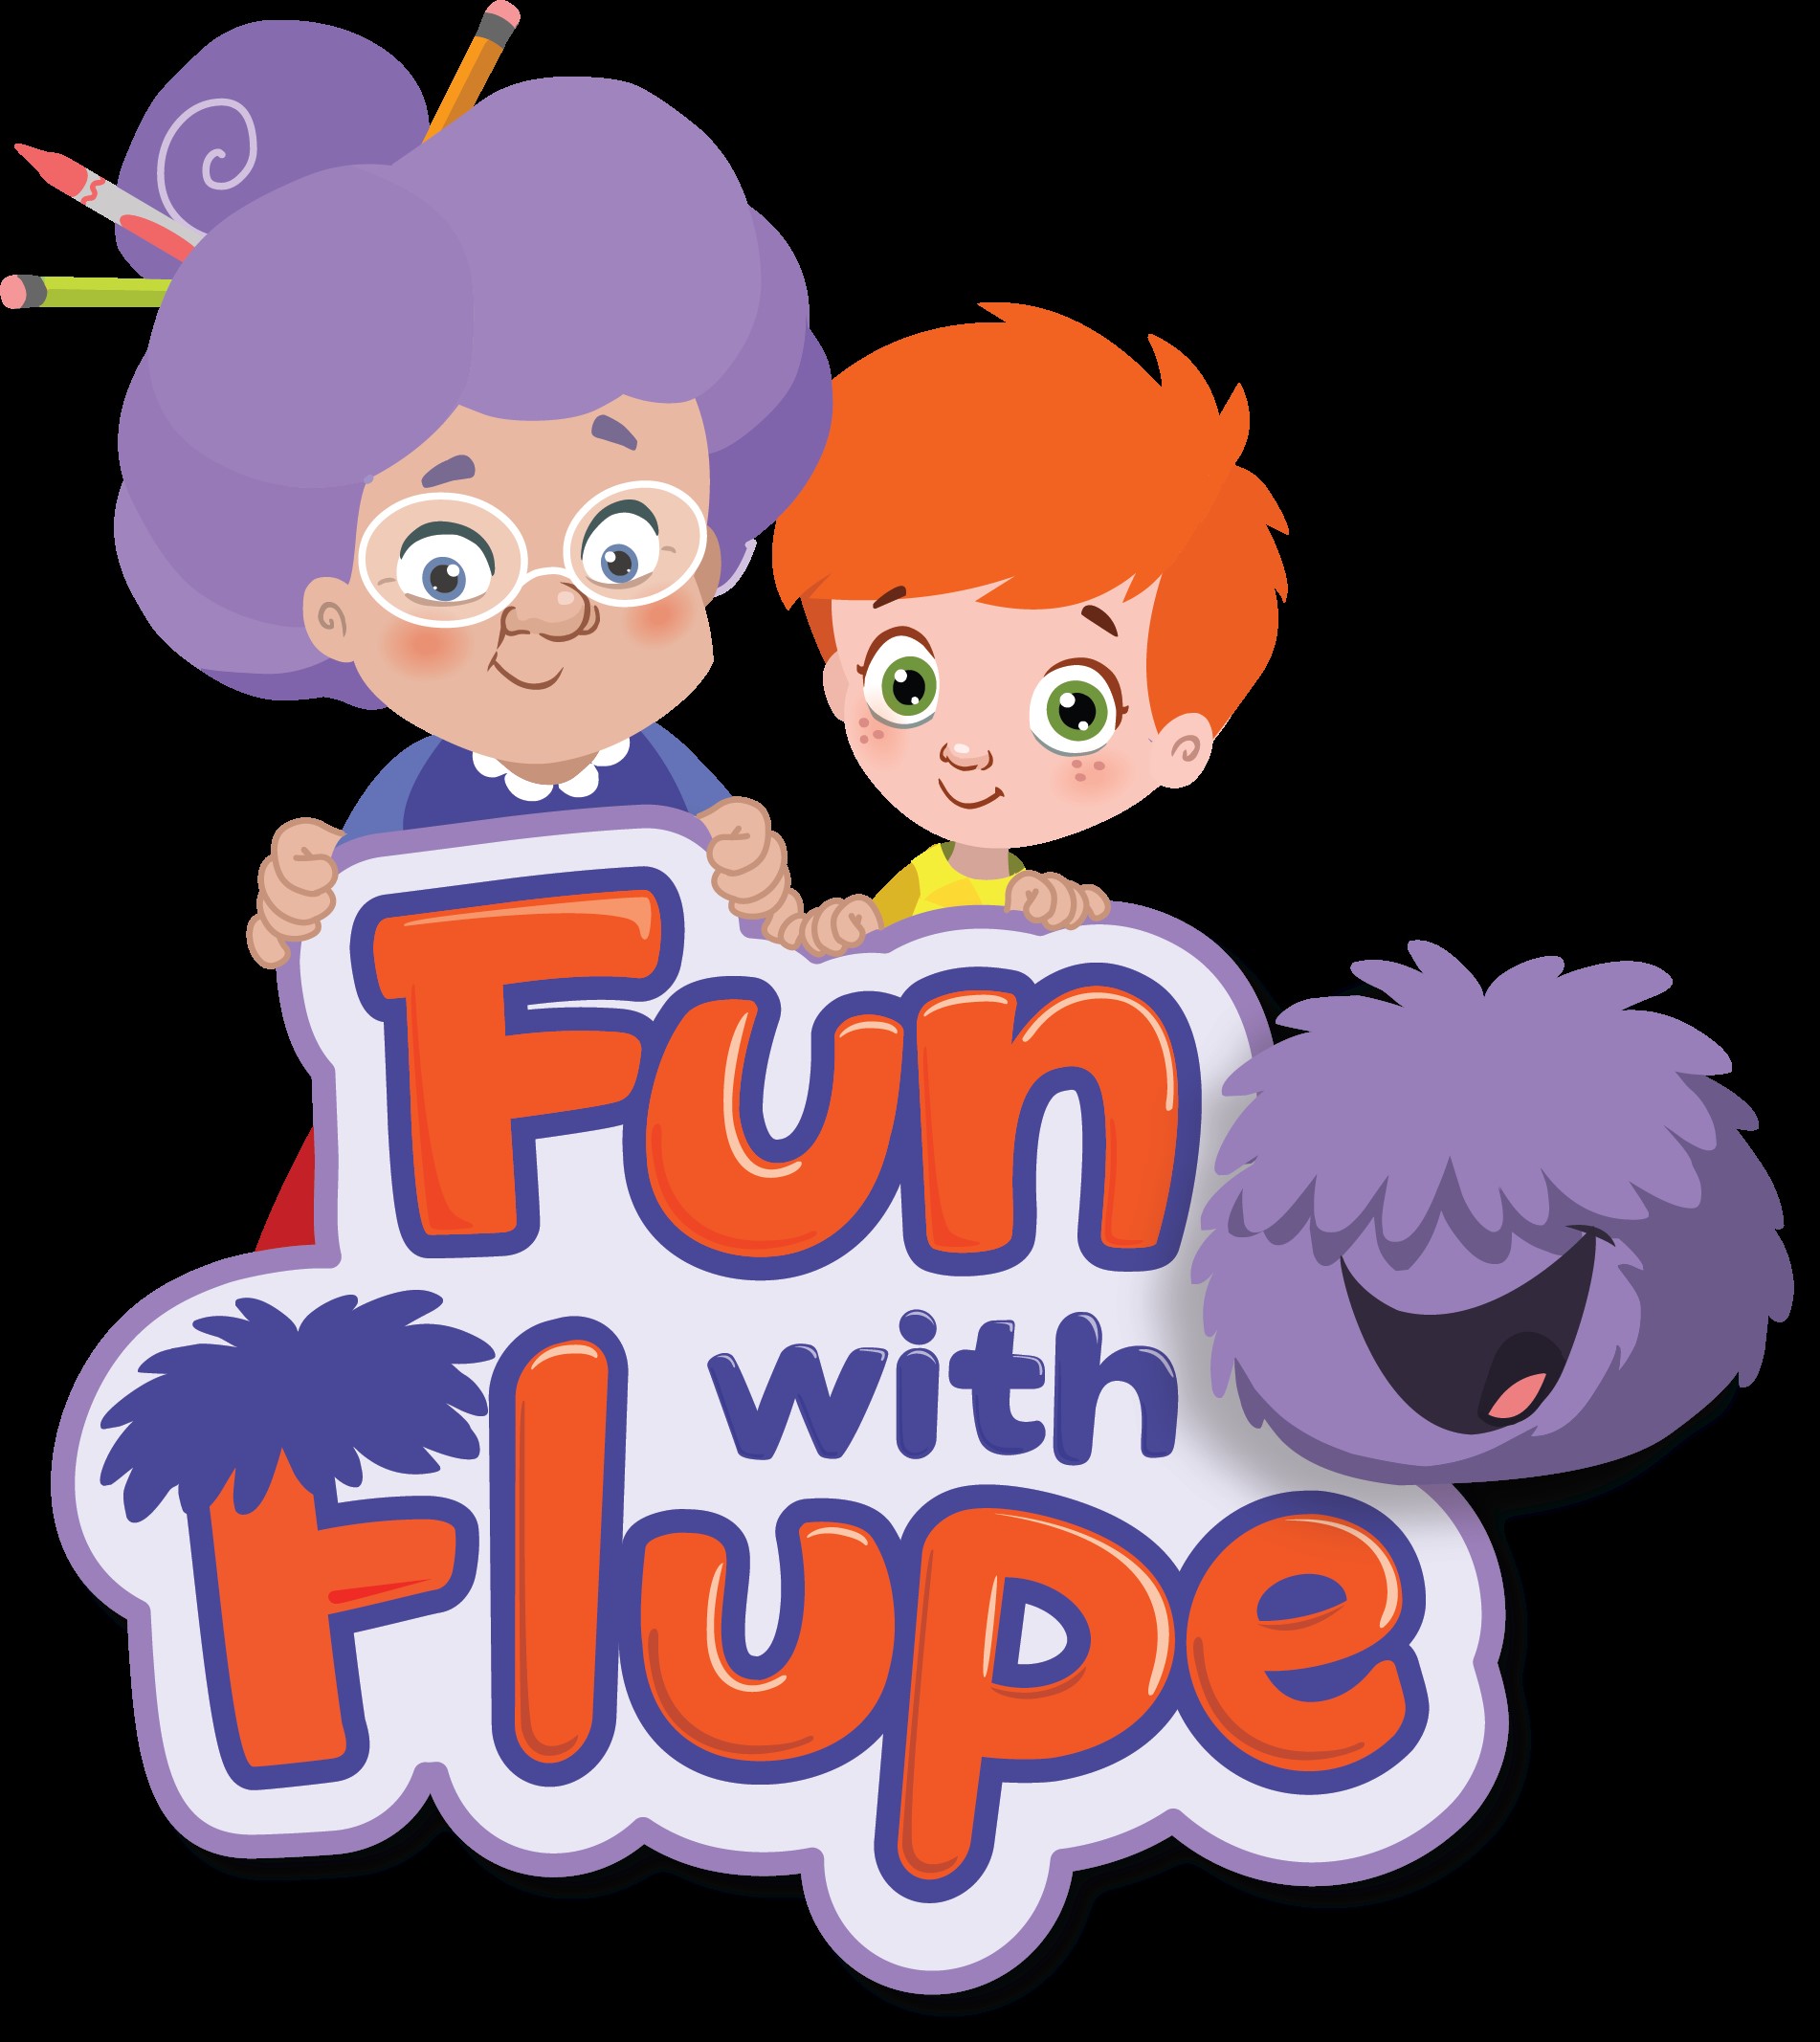 Fun with Flupe